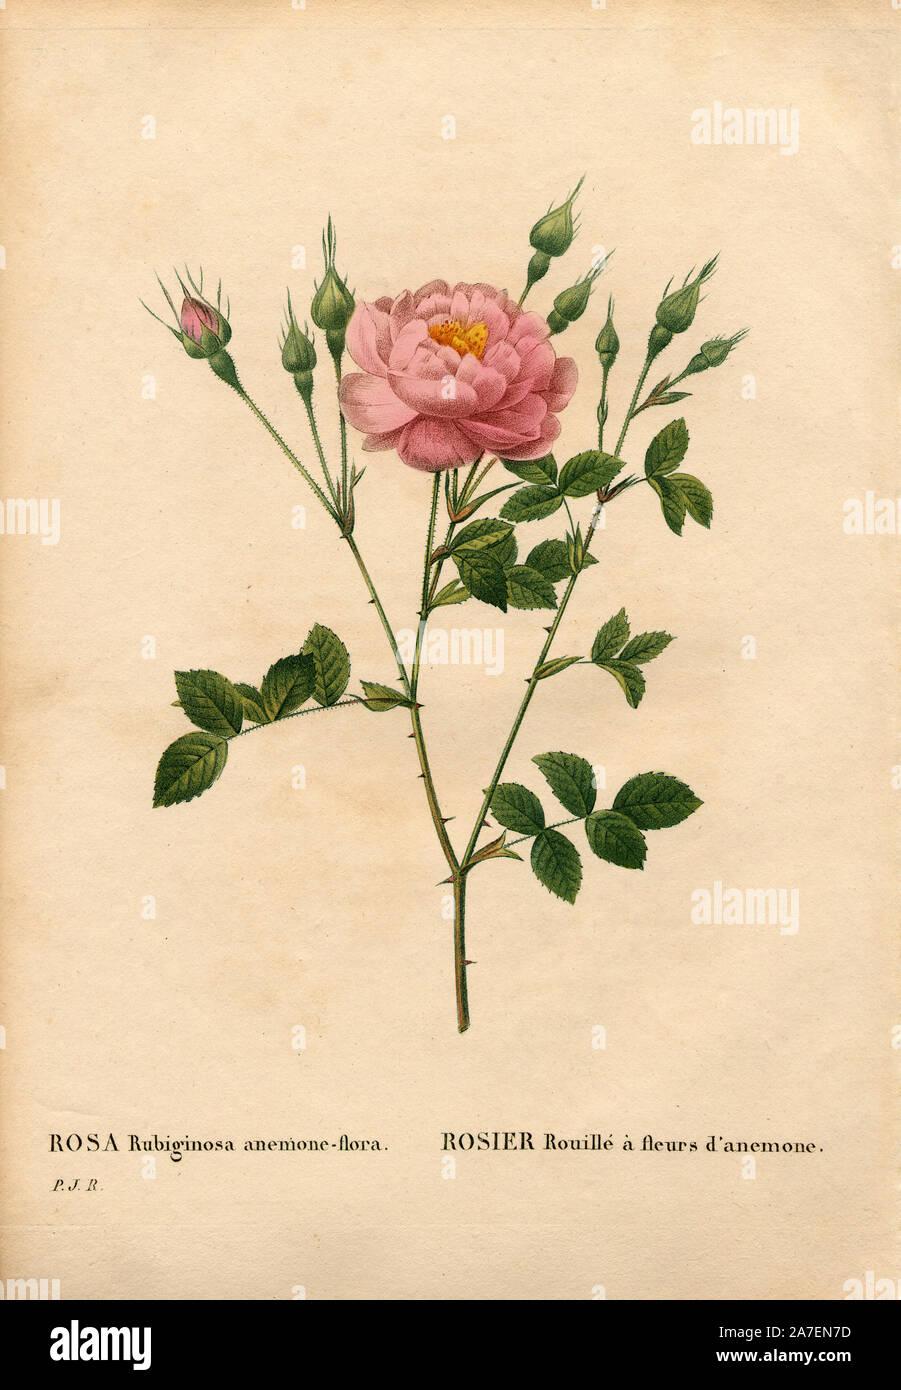 Anemone-flowered sweetbriar rose, Rosa rubiginosa variety, Rosier Rouillé à fleurs d’anémone. Handcoloured stipple copperplate engraving from Pierre Joseph Redoute's 'Les Roses,' Paris, 1828. Redoute was botanical artist to Marie Antoinette and Empress Josephine. He painted over 170 watercolours of roses from the gardens of Malmaison. Stock Photo